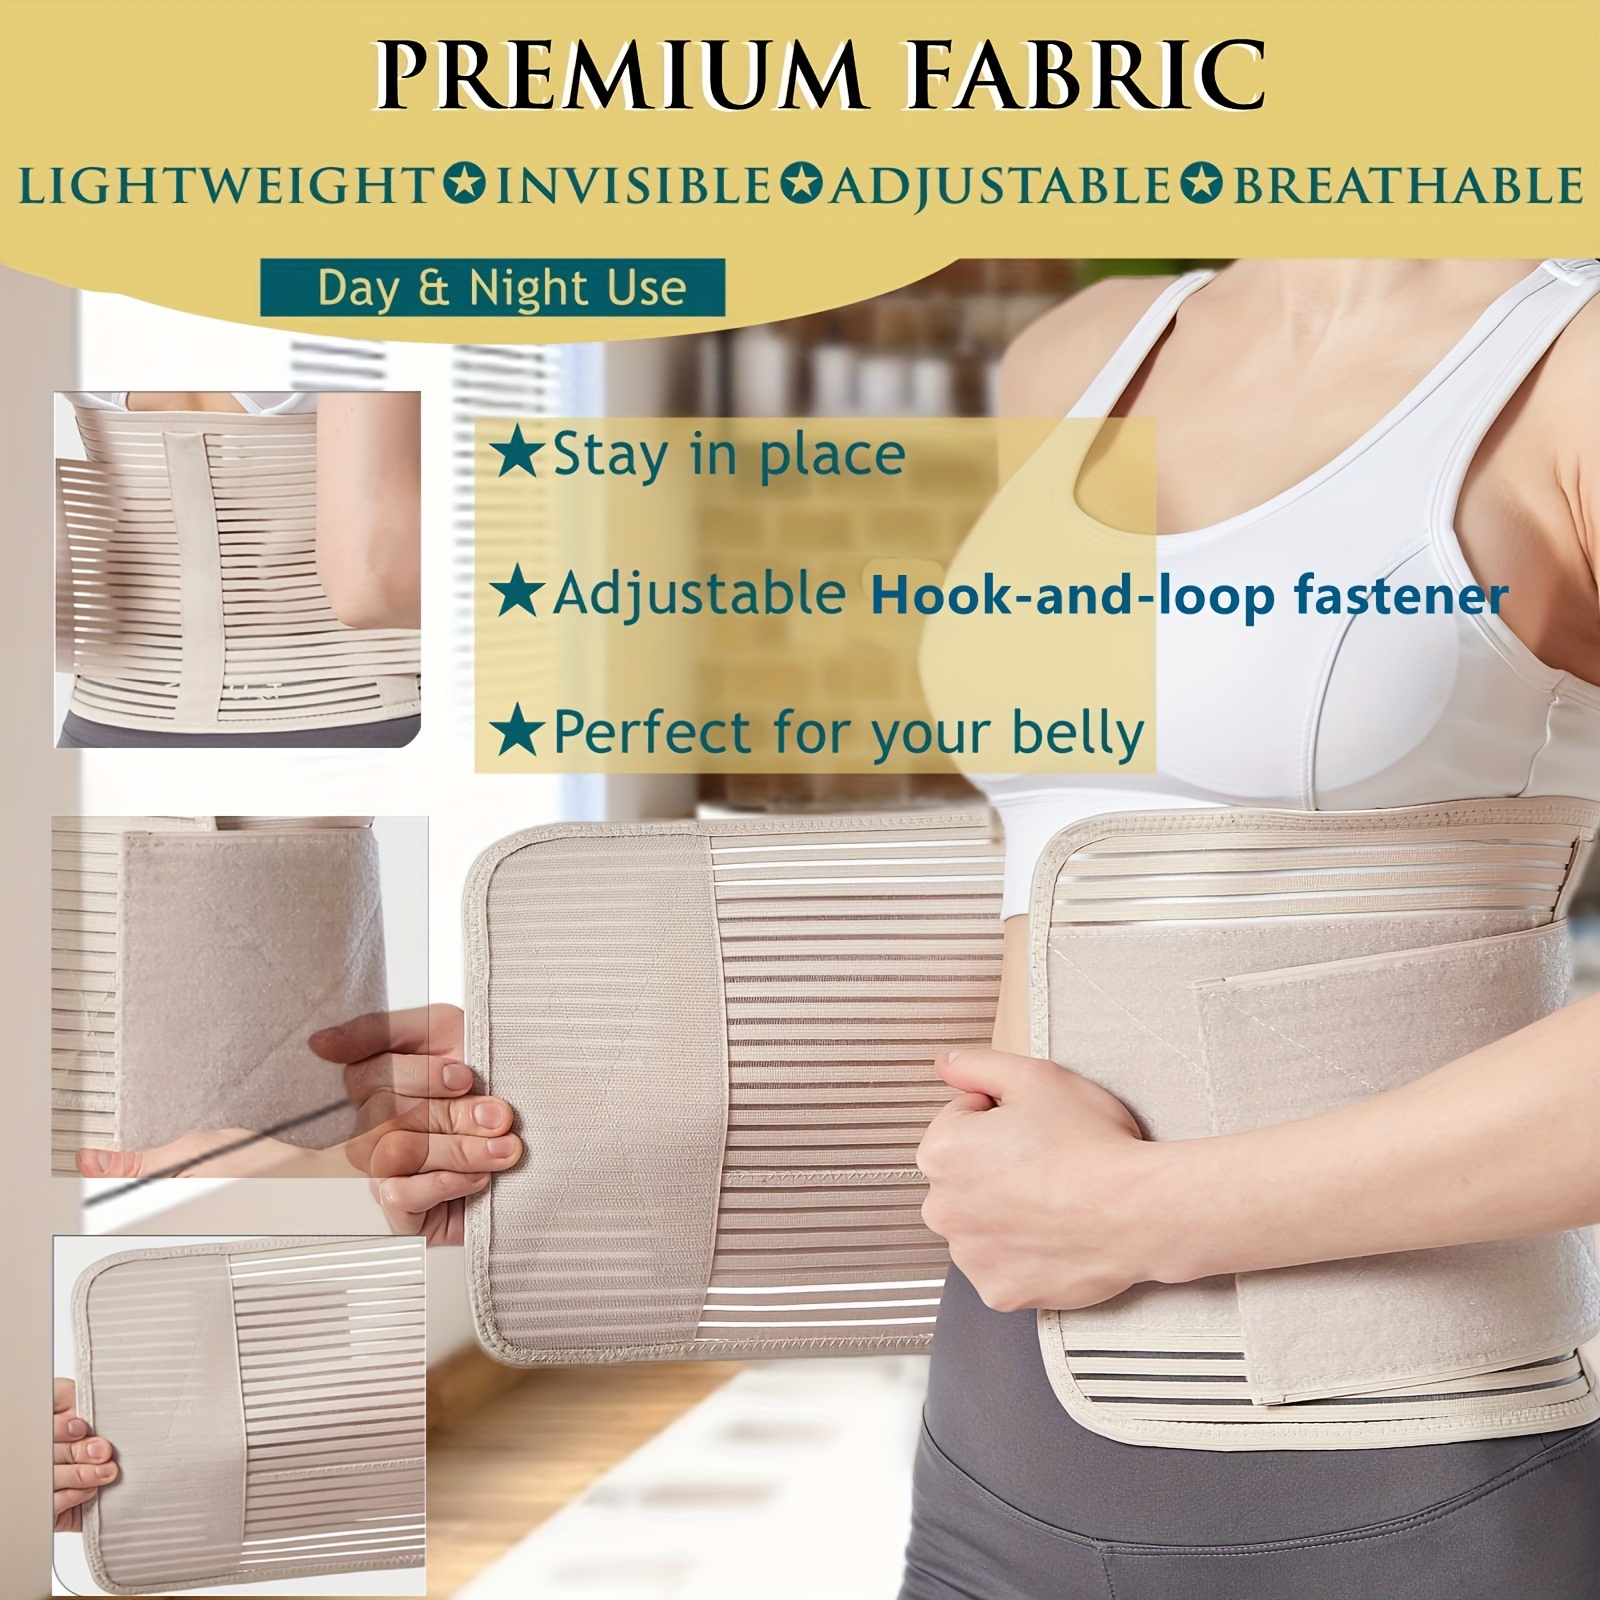 Get Back In Shape Quickly With Our Postpartum Belly Band For C